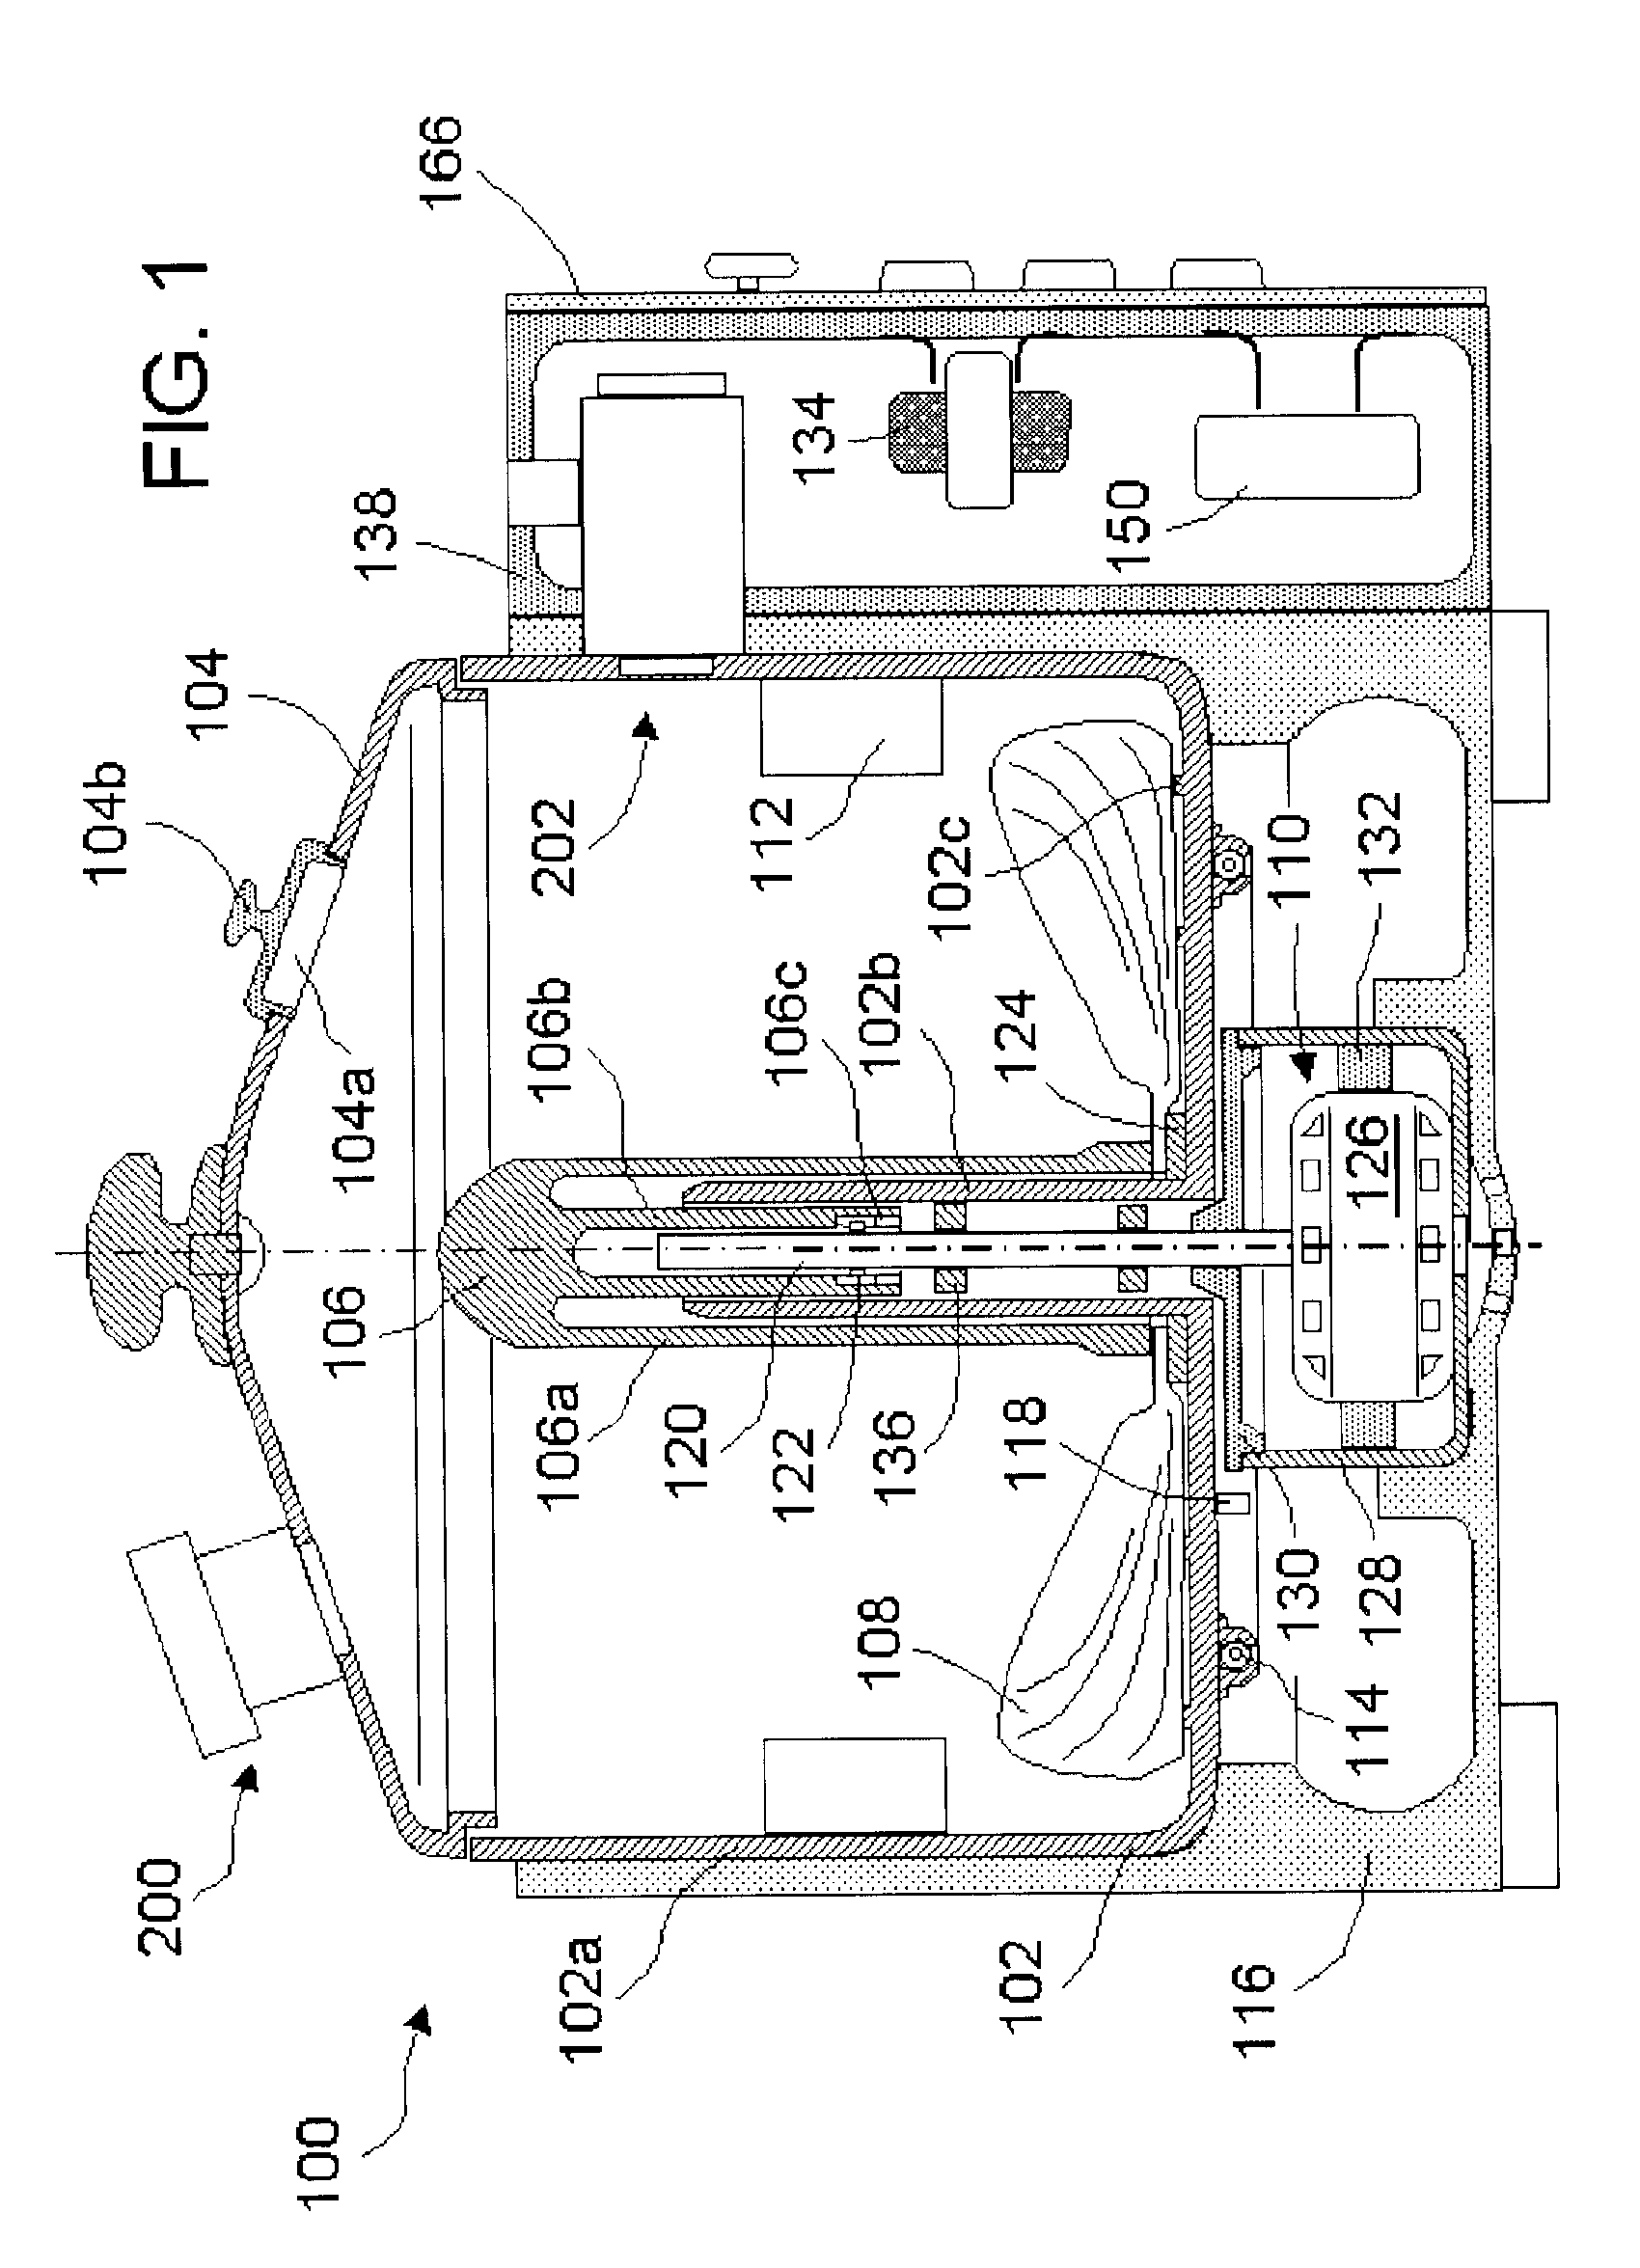 Automatic frying apparatus for both deep and shallow frying